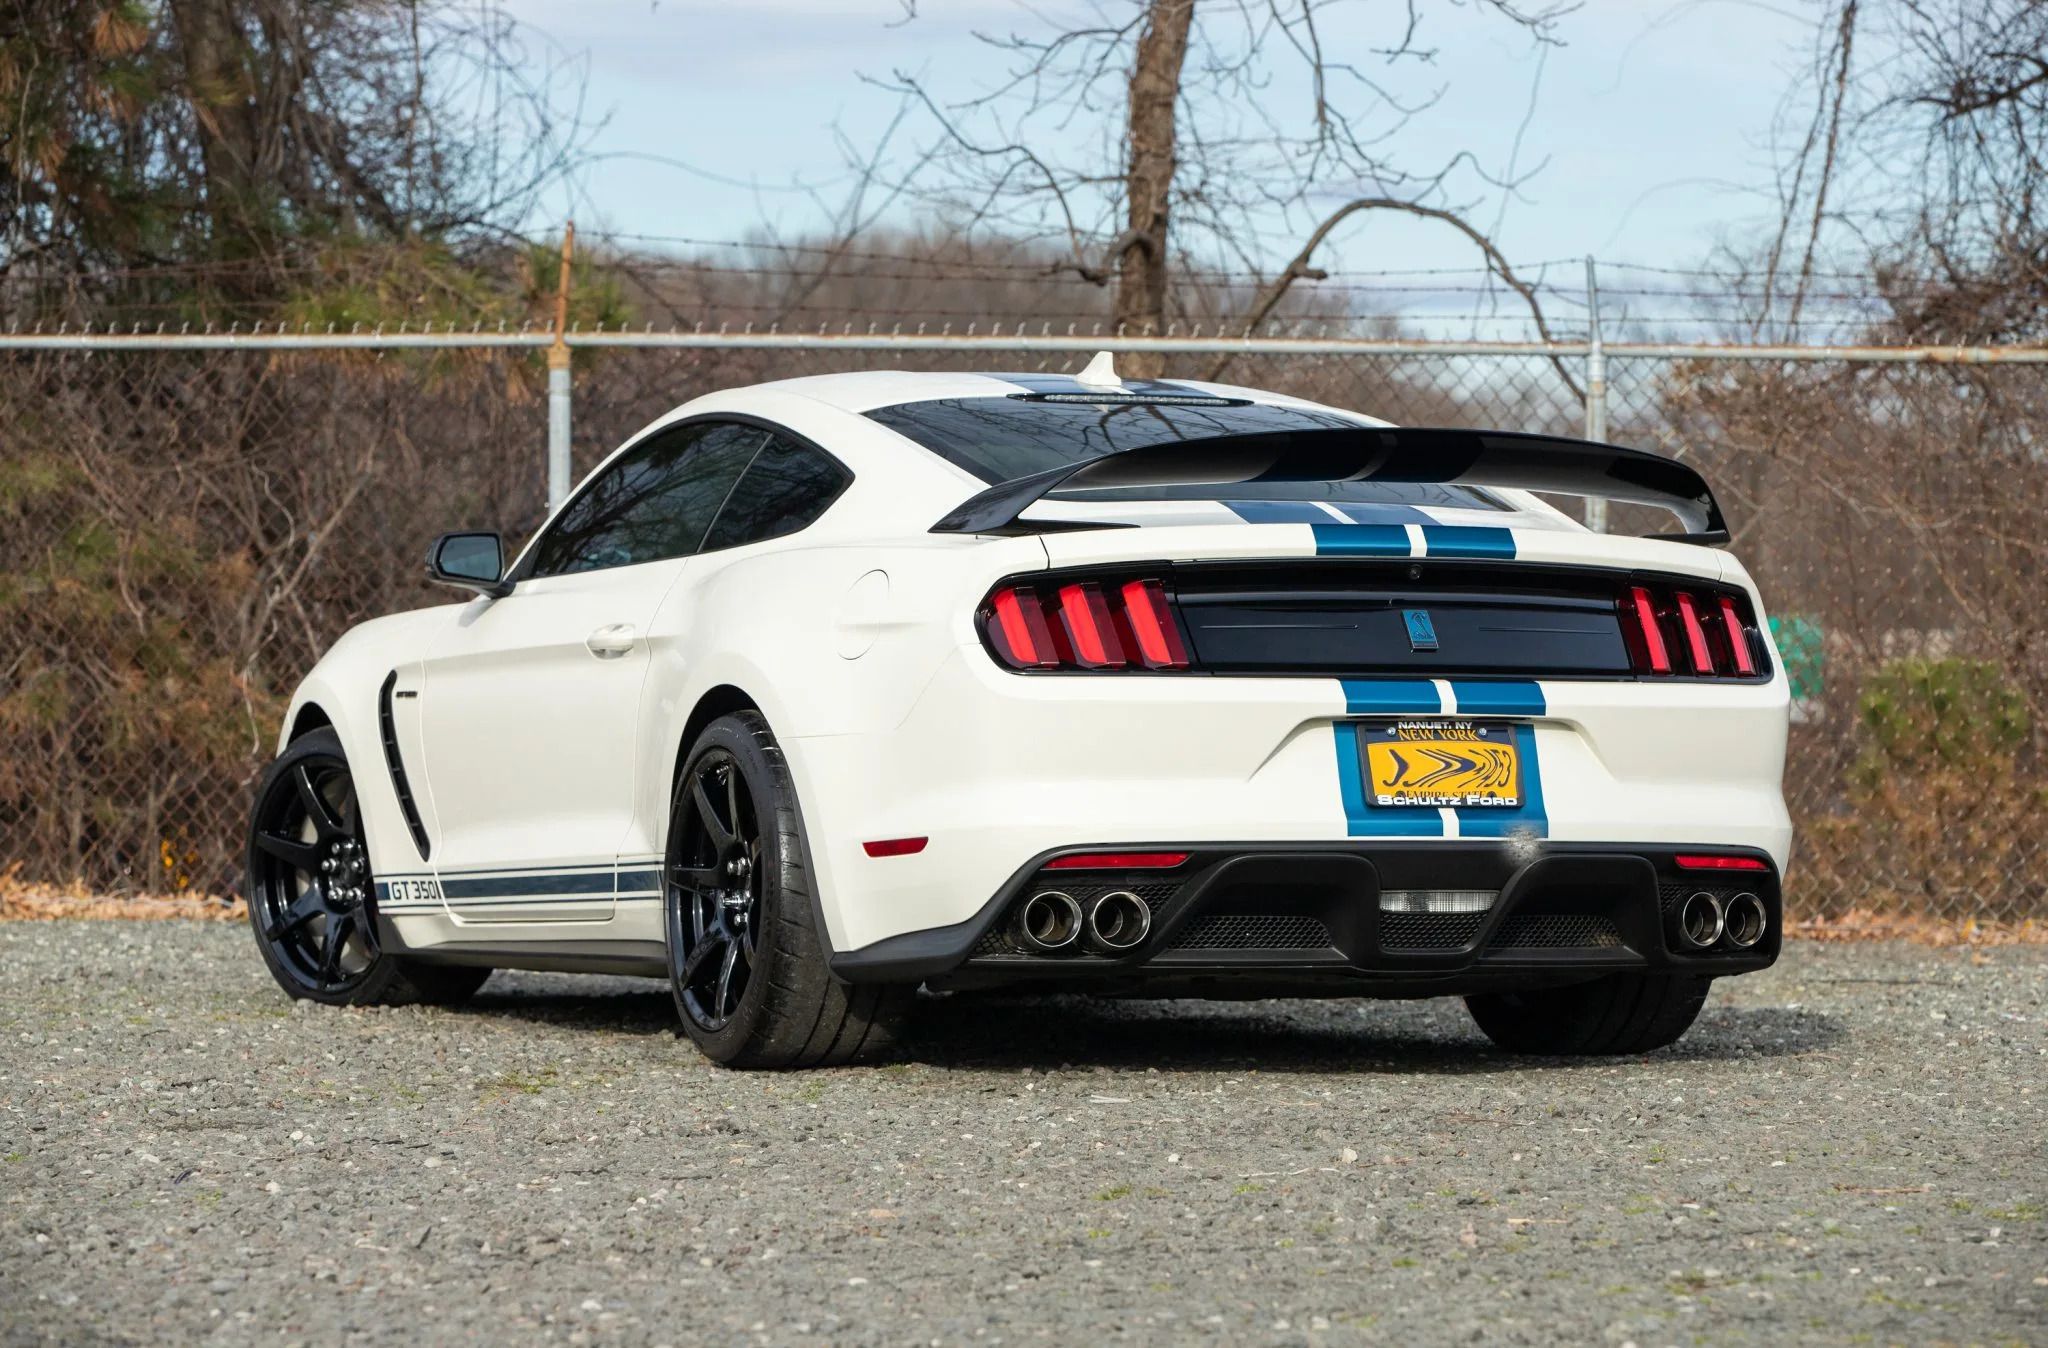 2020 Ford Mustang Shelby GT350R Heritage Edition Rear Quarter View